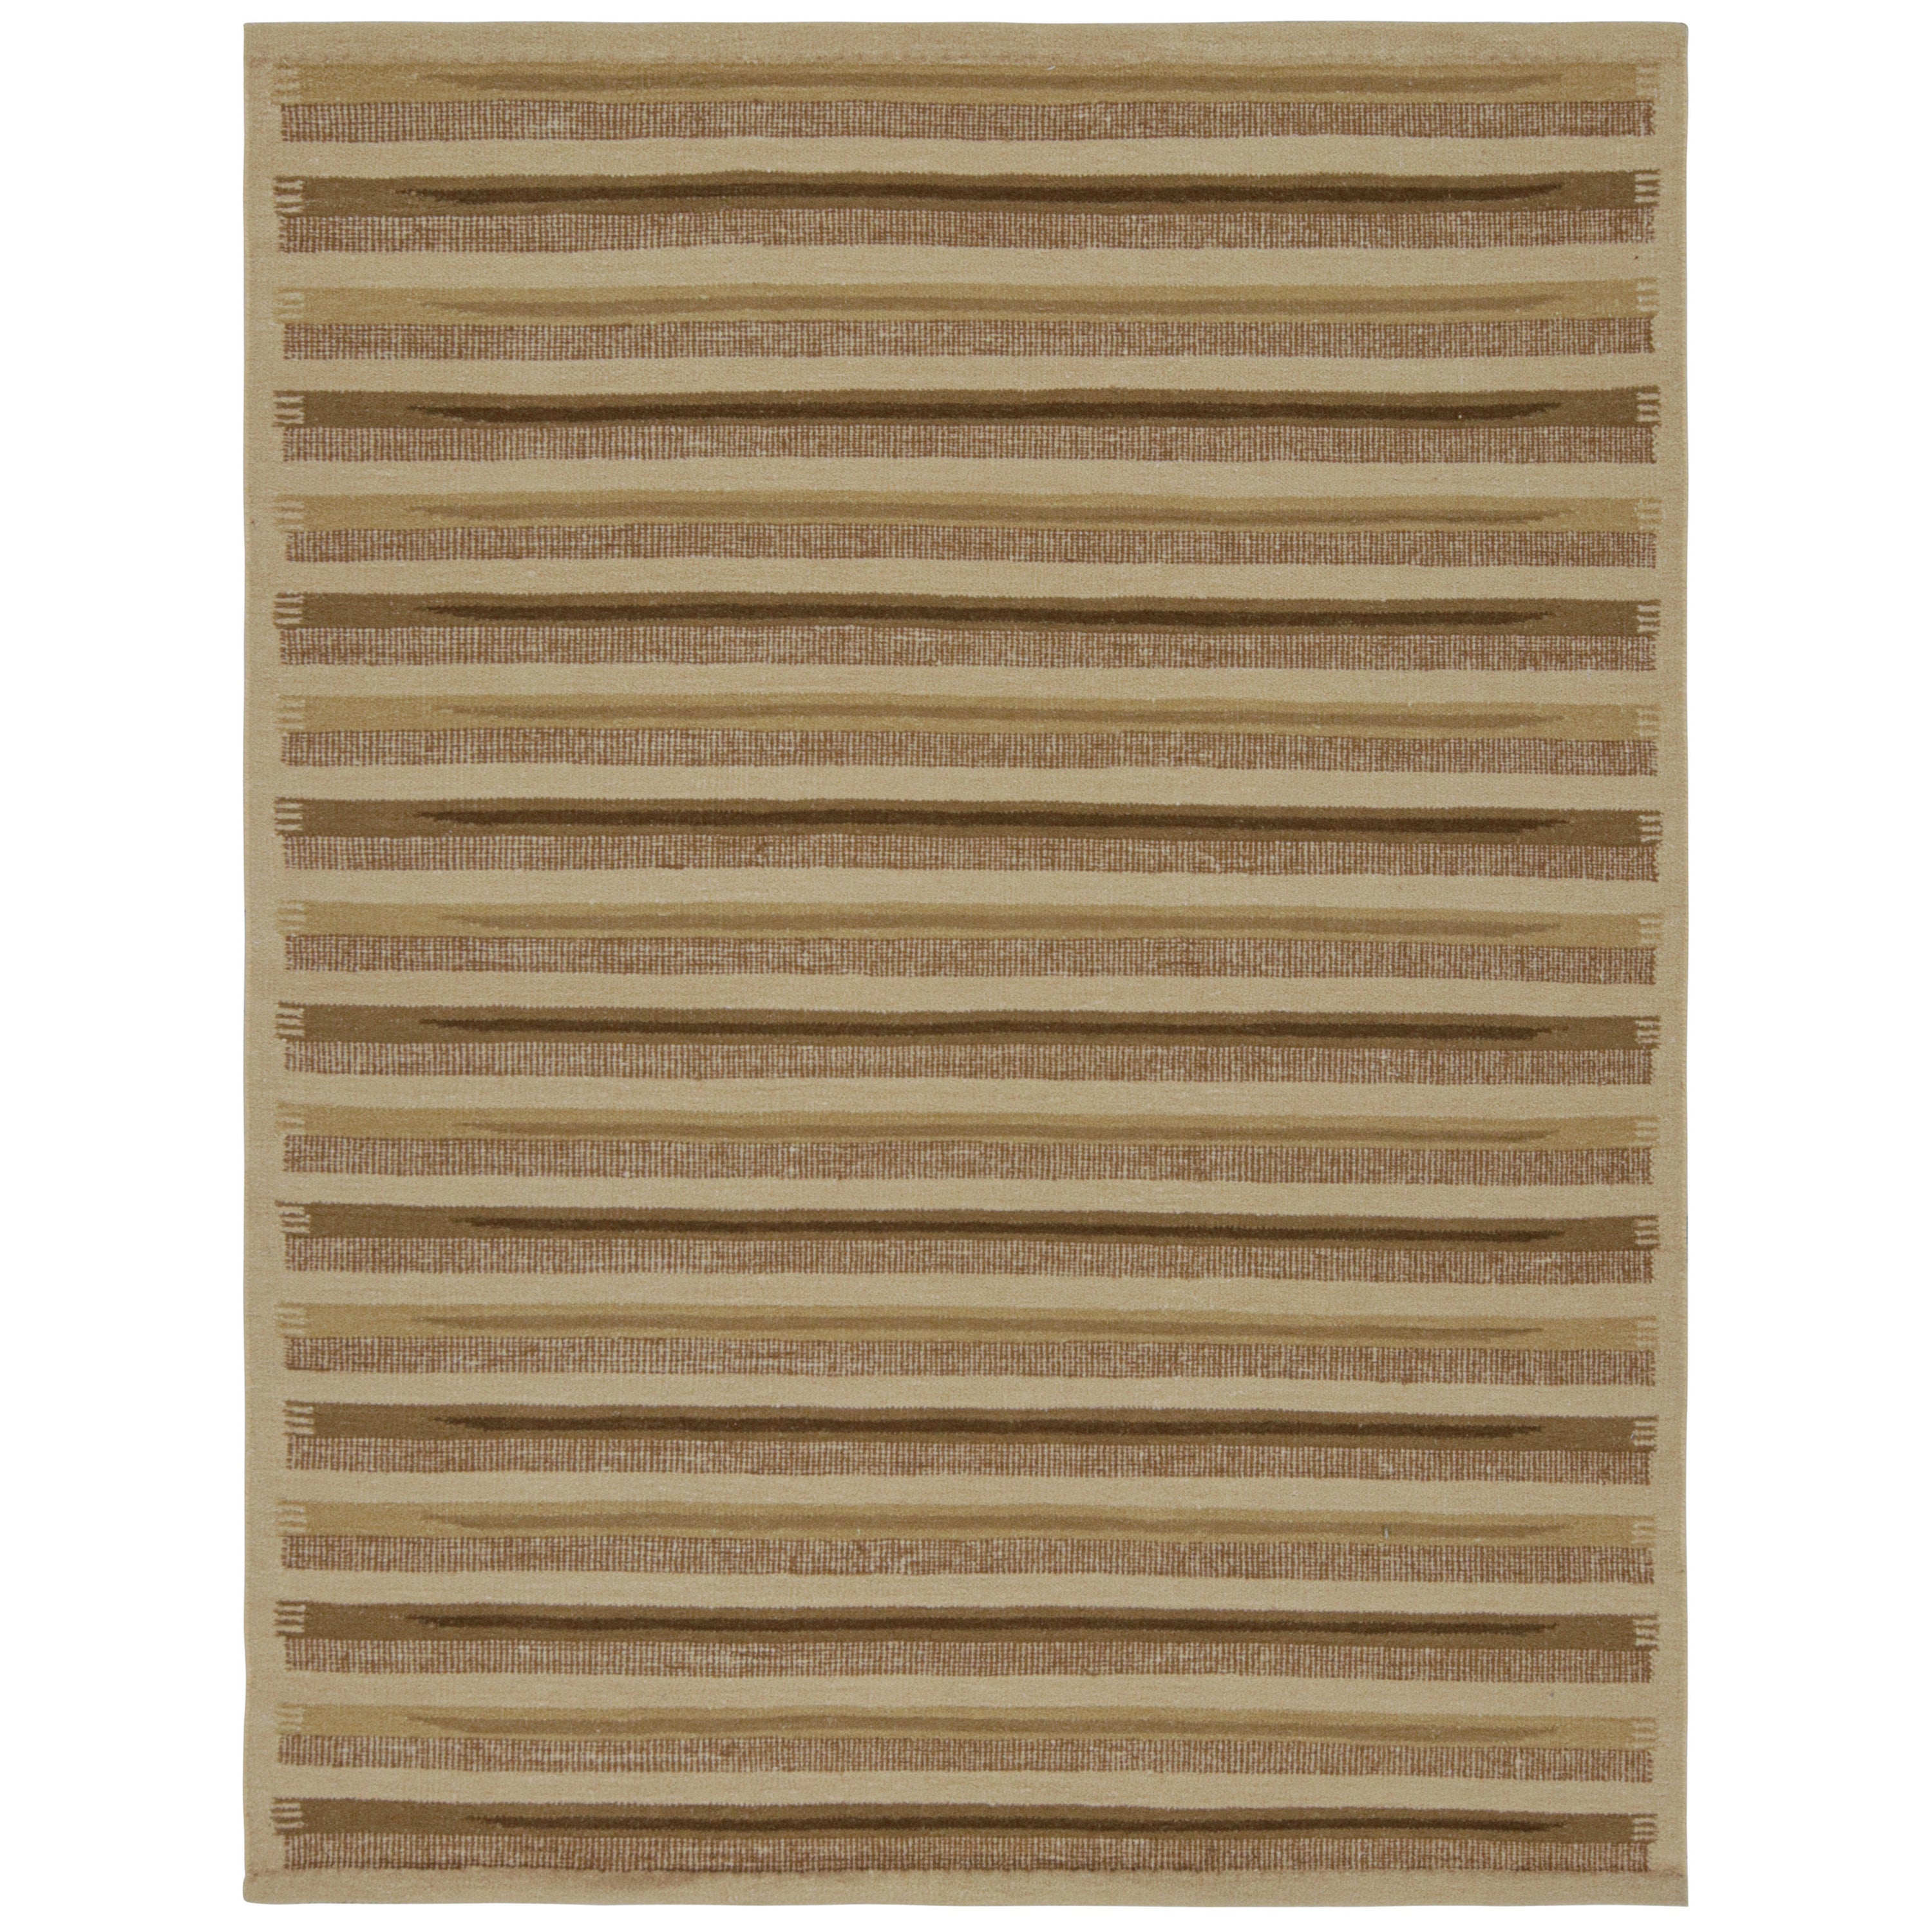 Rug & Kilim’s Scandinavian Style Rug with Chartreuse and Beige-Brown Stripes For Sale